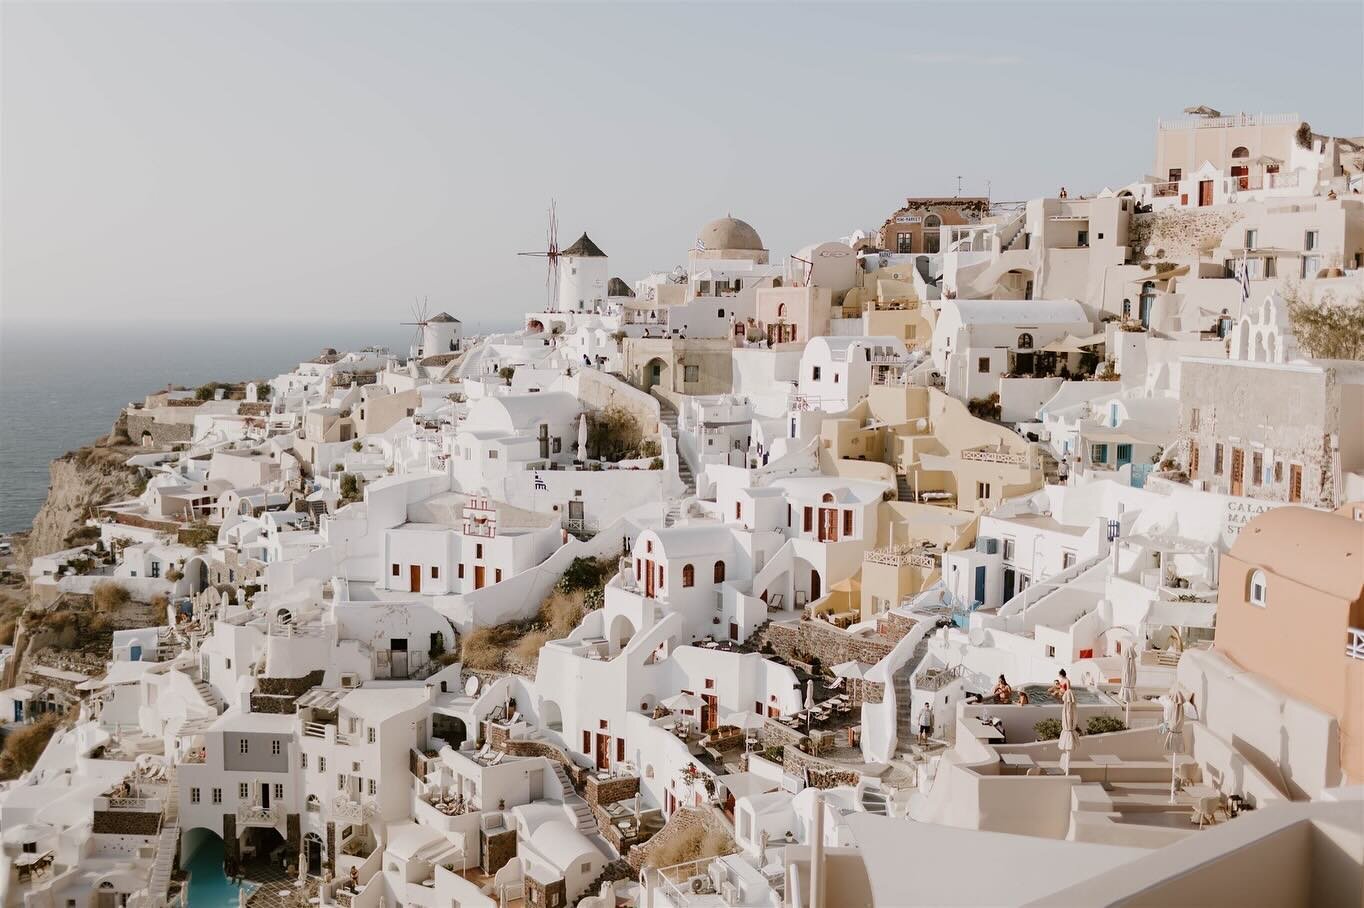 Santorini 💙

Santorini was always my bucket list location and I was so lucky to visit this place last October. Here are few landscape photos from this beautiful trip. Can&rsquo;t wait for 2024 adventures! 

Santorini Wedding &bull; Santorini Wedding